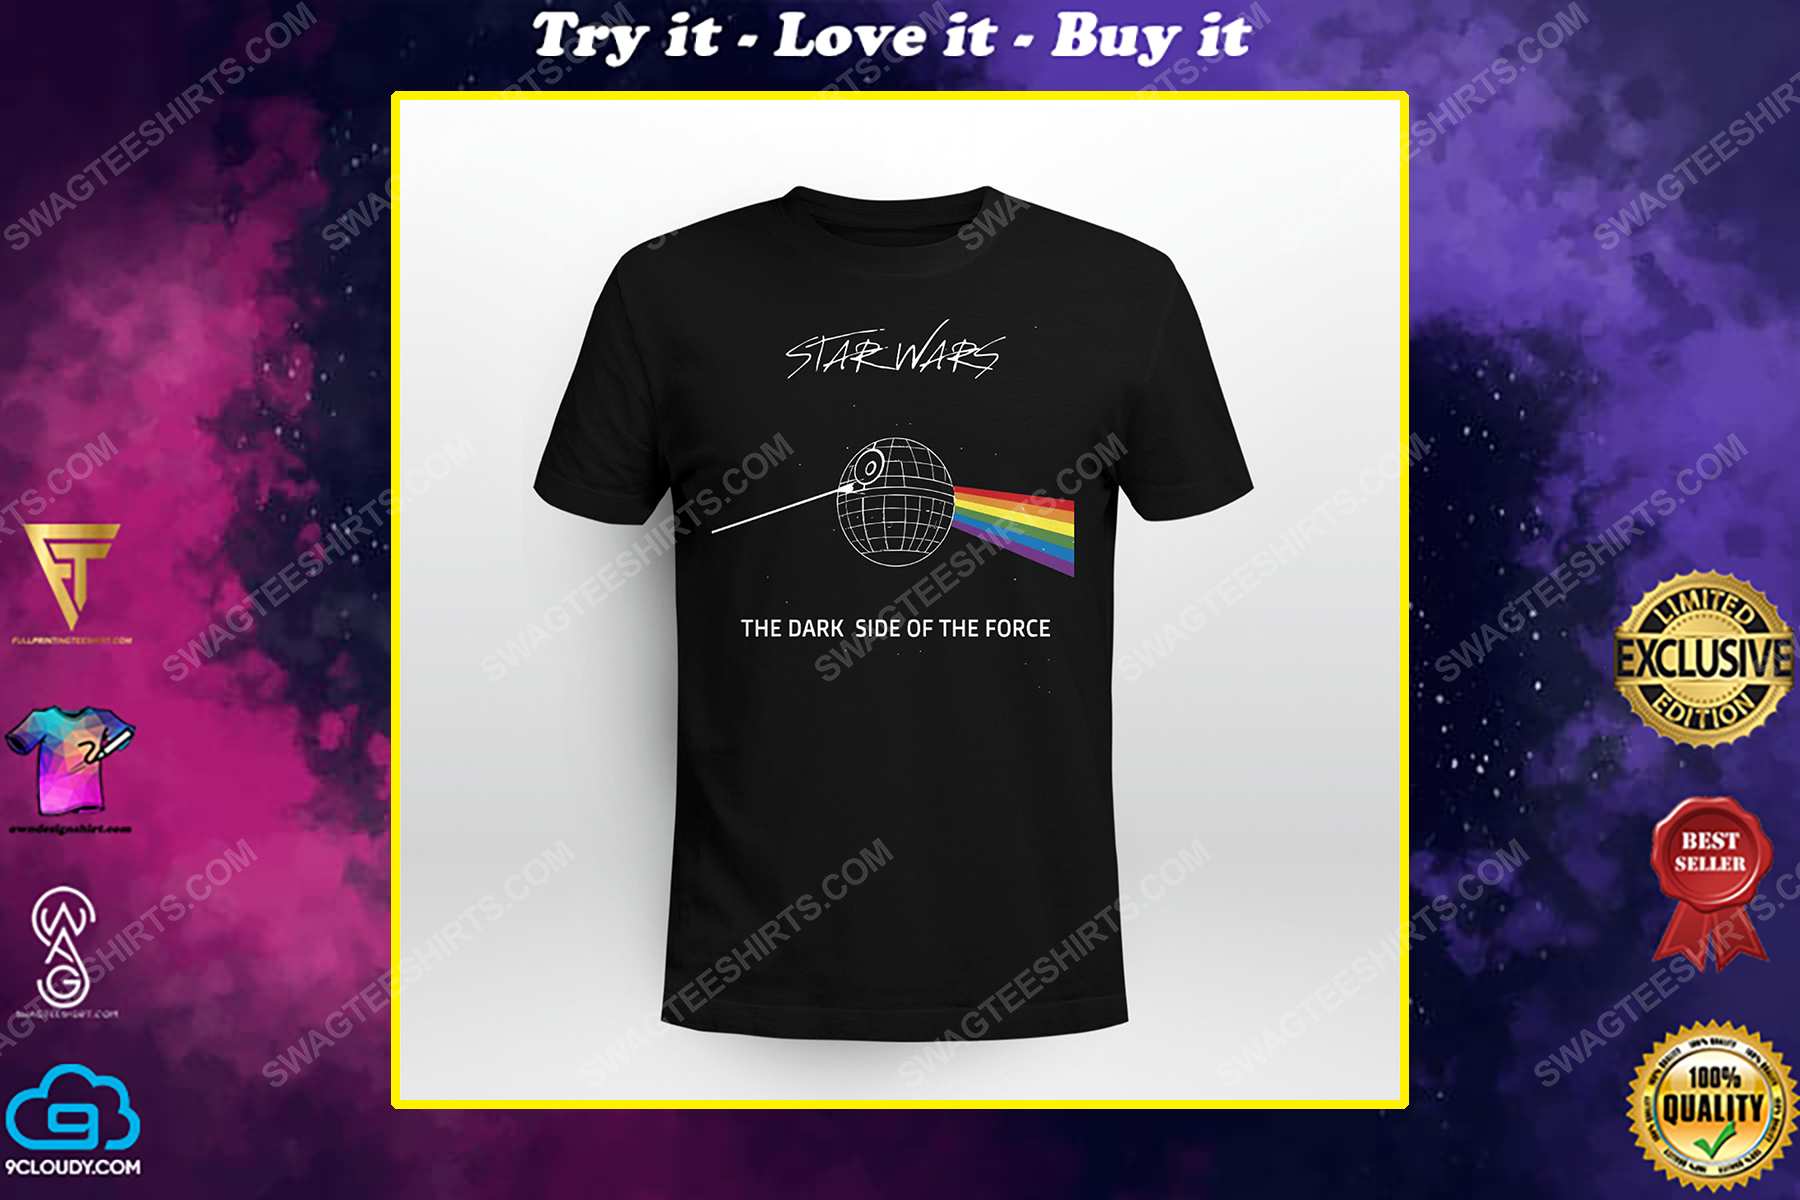 Star wars and pink floyd the dark side of the force shirt